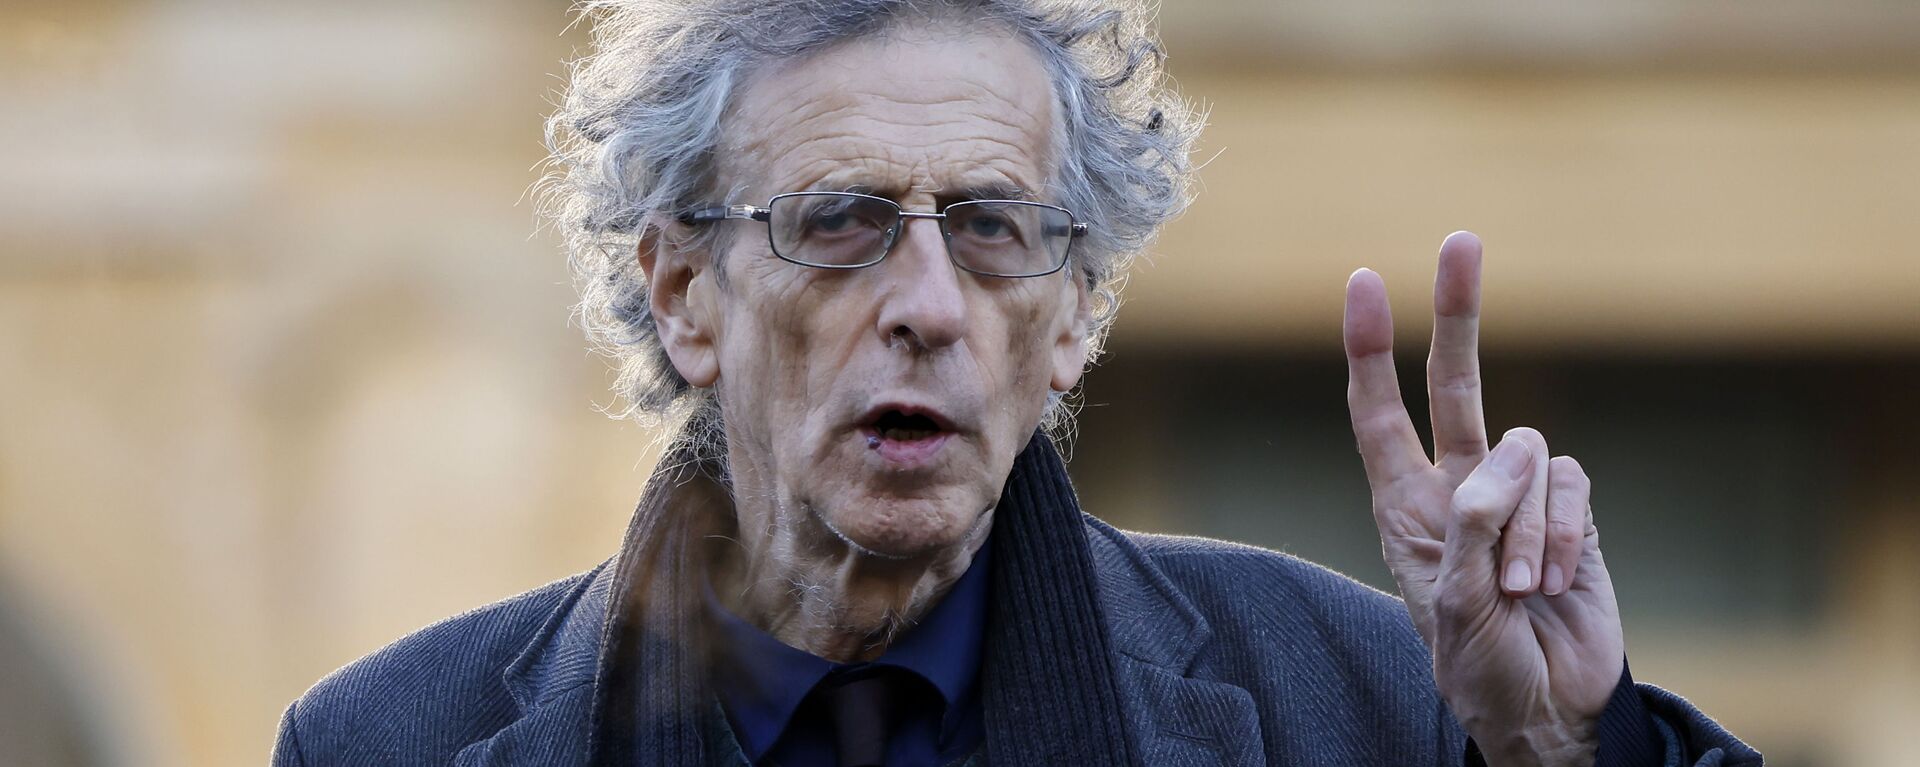 Piers Corbyn, brother of Jeremy Corbyn, the former leader of Britain's opposition Labour party, arrives at Westminster Magistrates court in central London on November 27, 2020. - Piers is accused of attending anti-lockdown and anti vaccine protests at Hyde Park during the first coronavirus COVID-19 lockdown period. (Photo by Tolga Akmen / AFP) - Sputnik International, 1920, 05.02.2021